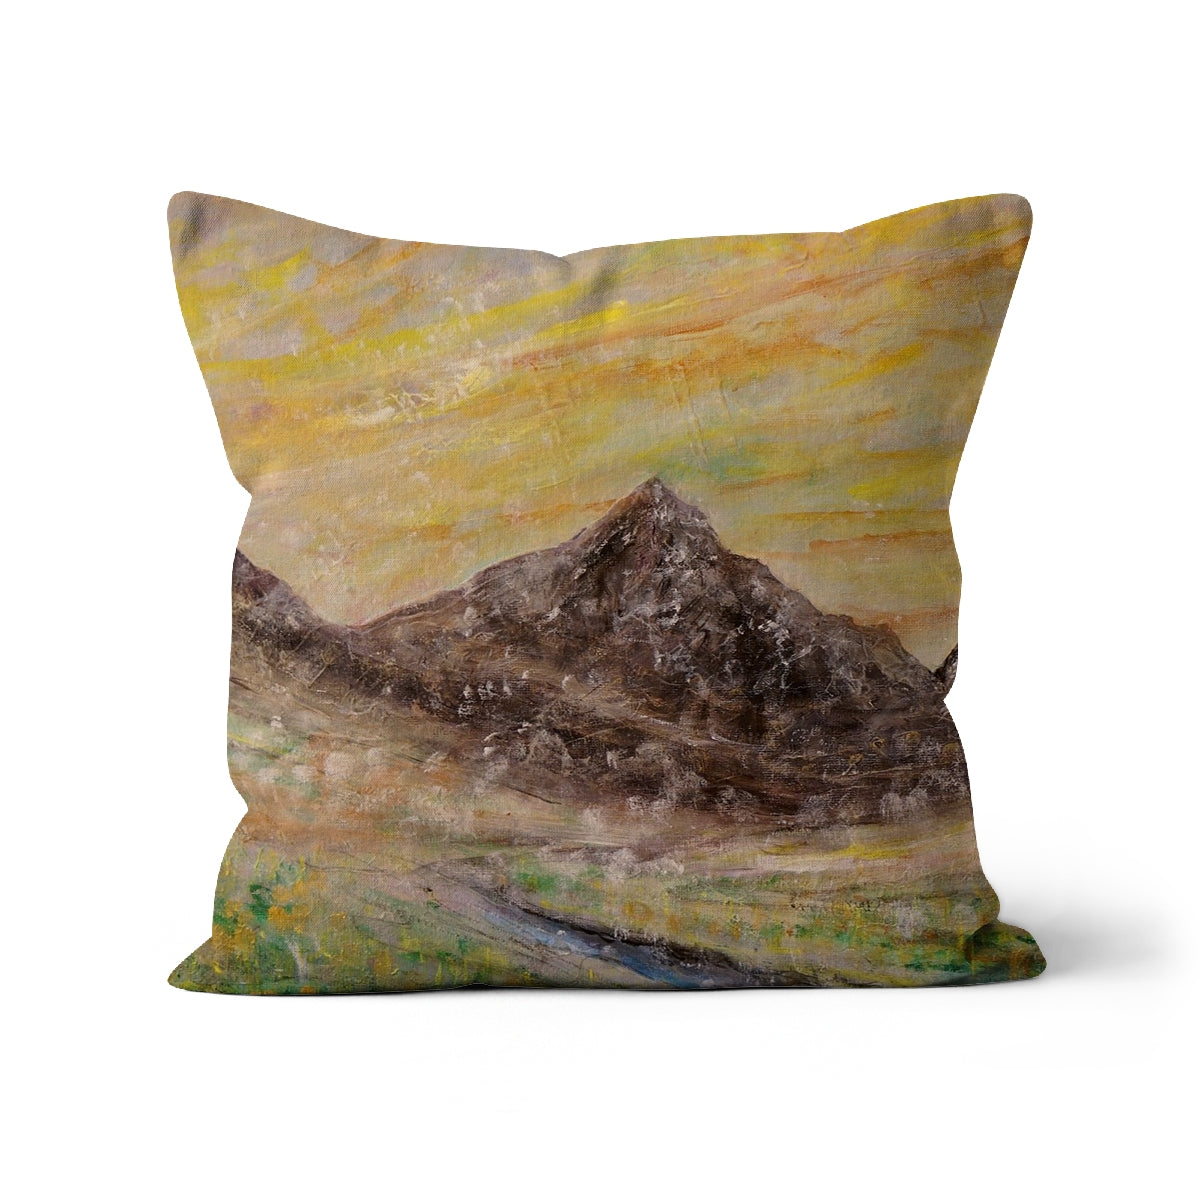 Glen Rosa Mist Arran Art Gifts Cushion-Cushions-Arran Art Gallery-Faux Suede-22"x22"-Paintings, Prints, Homeware, Art Gifts From Scotland By Scottish Artist Kevin Hunter